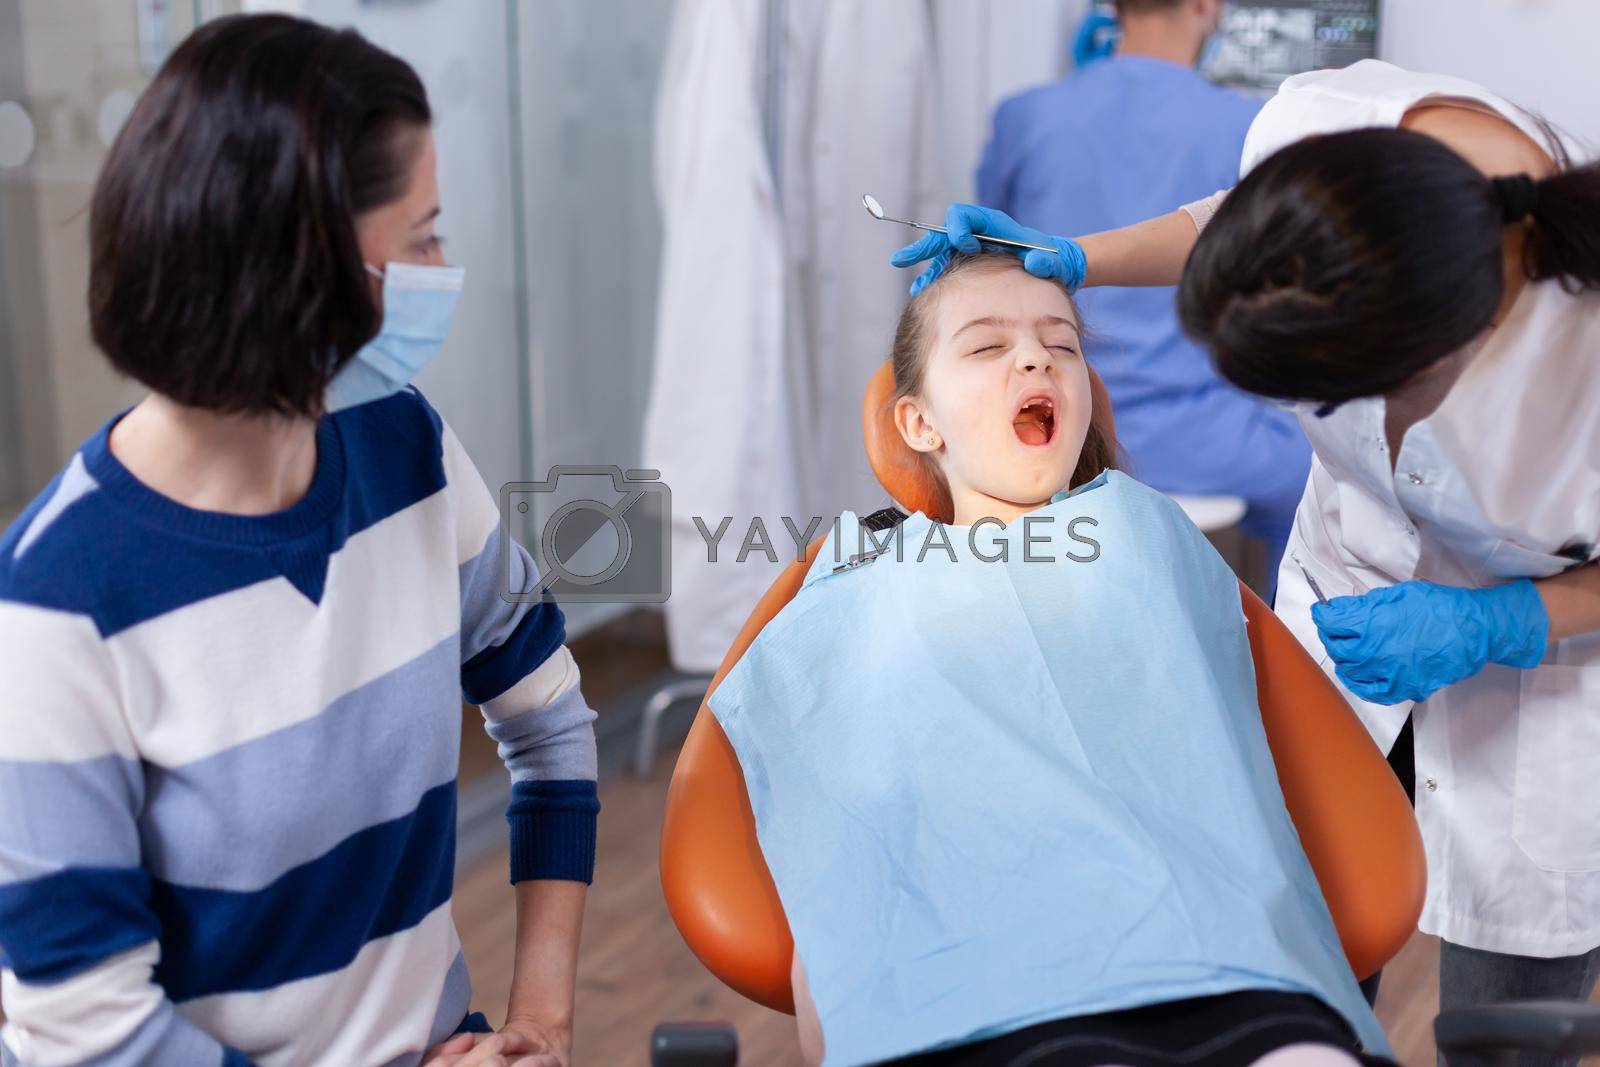 Dental doctor checking tooth hygine of kid with open mouth sitting on chair. Dentistry specialist during child cavity consultation in stomatology office using modern technology.